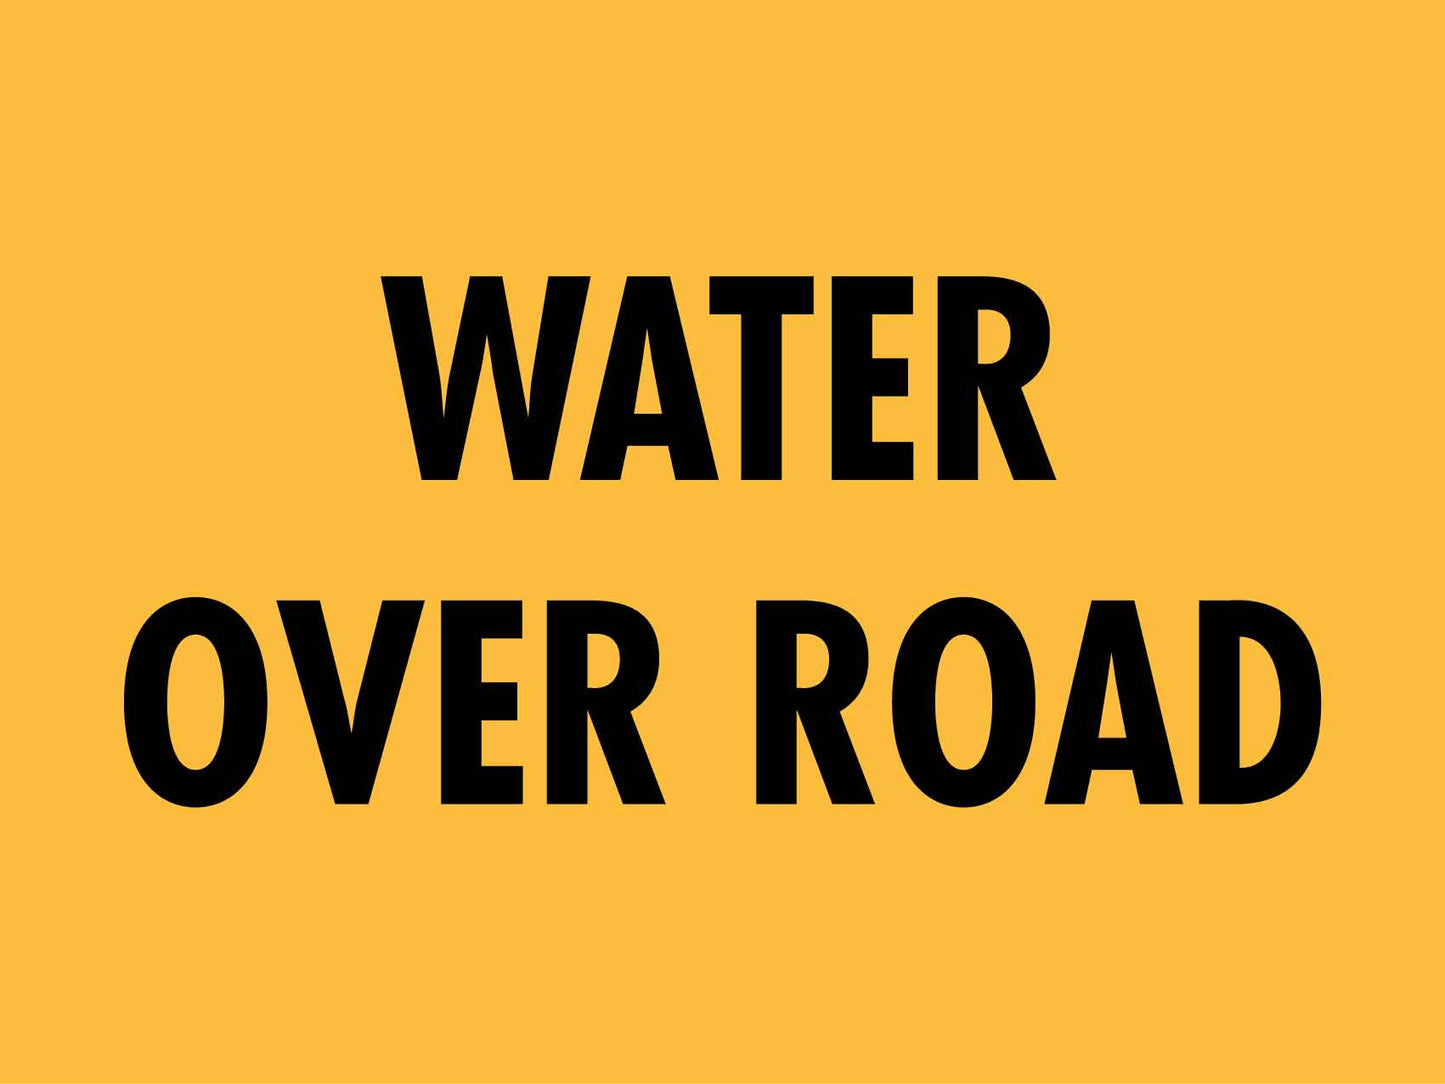 Water Over Road Sign